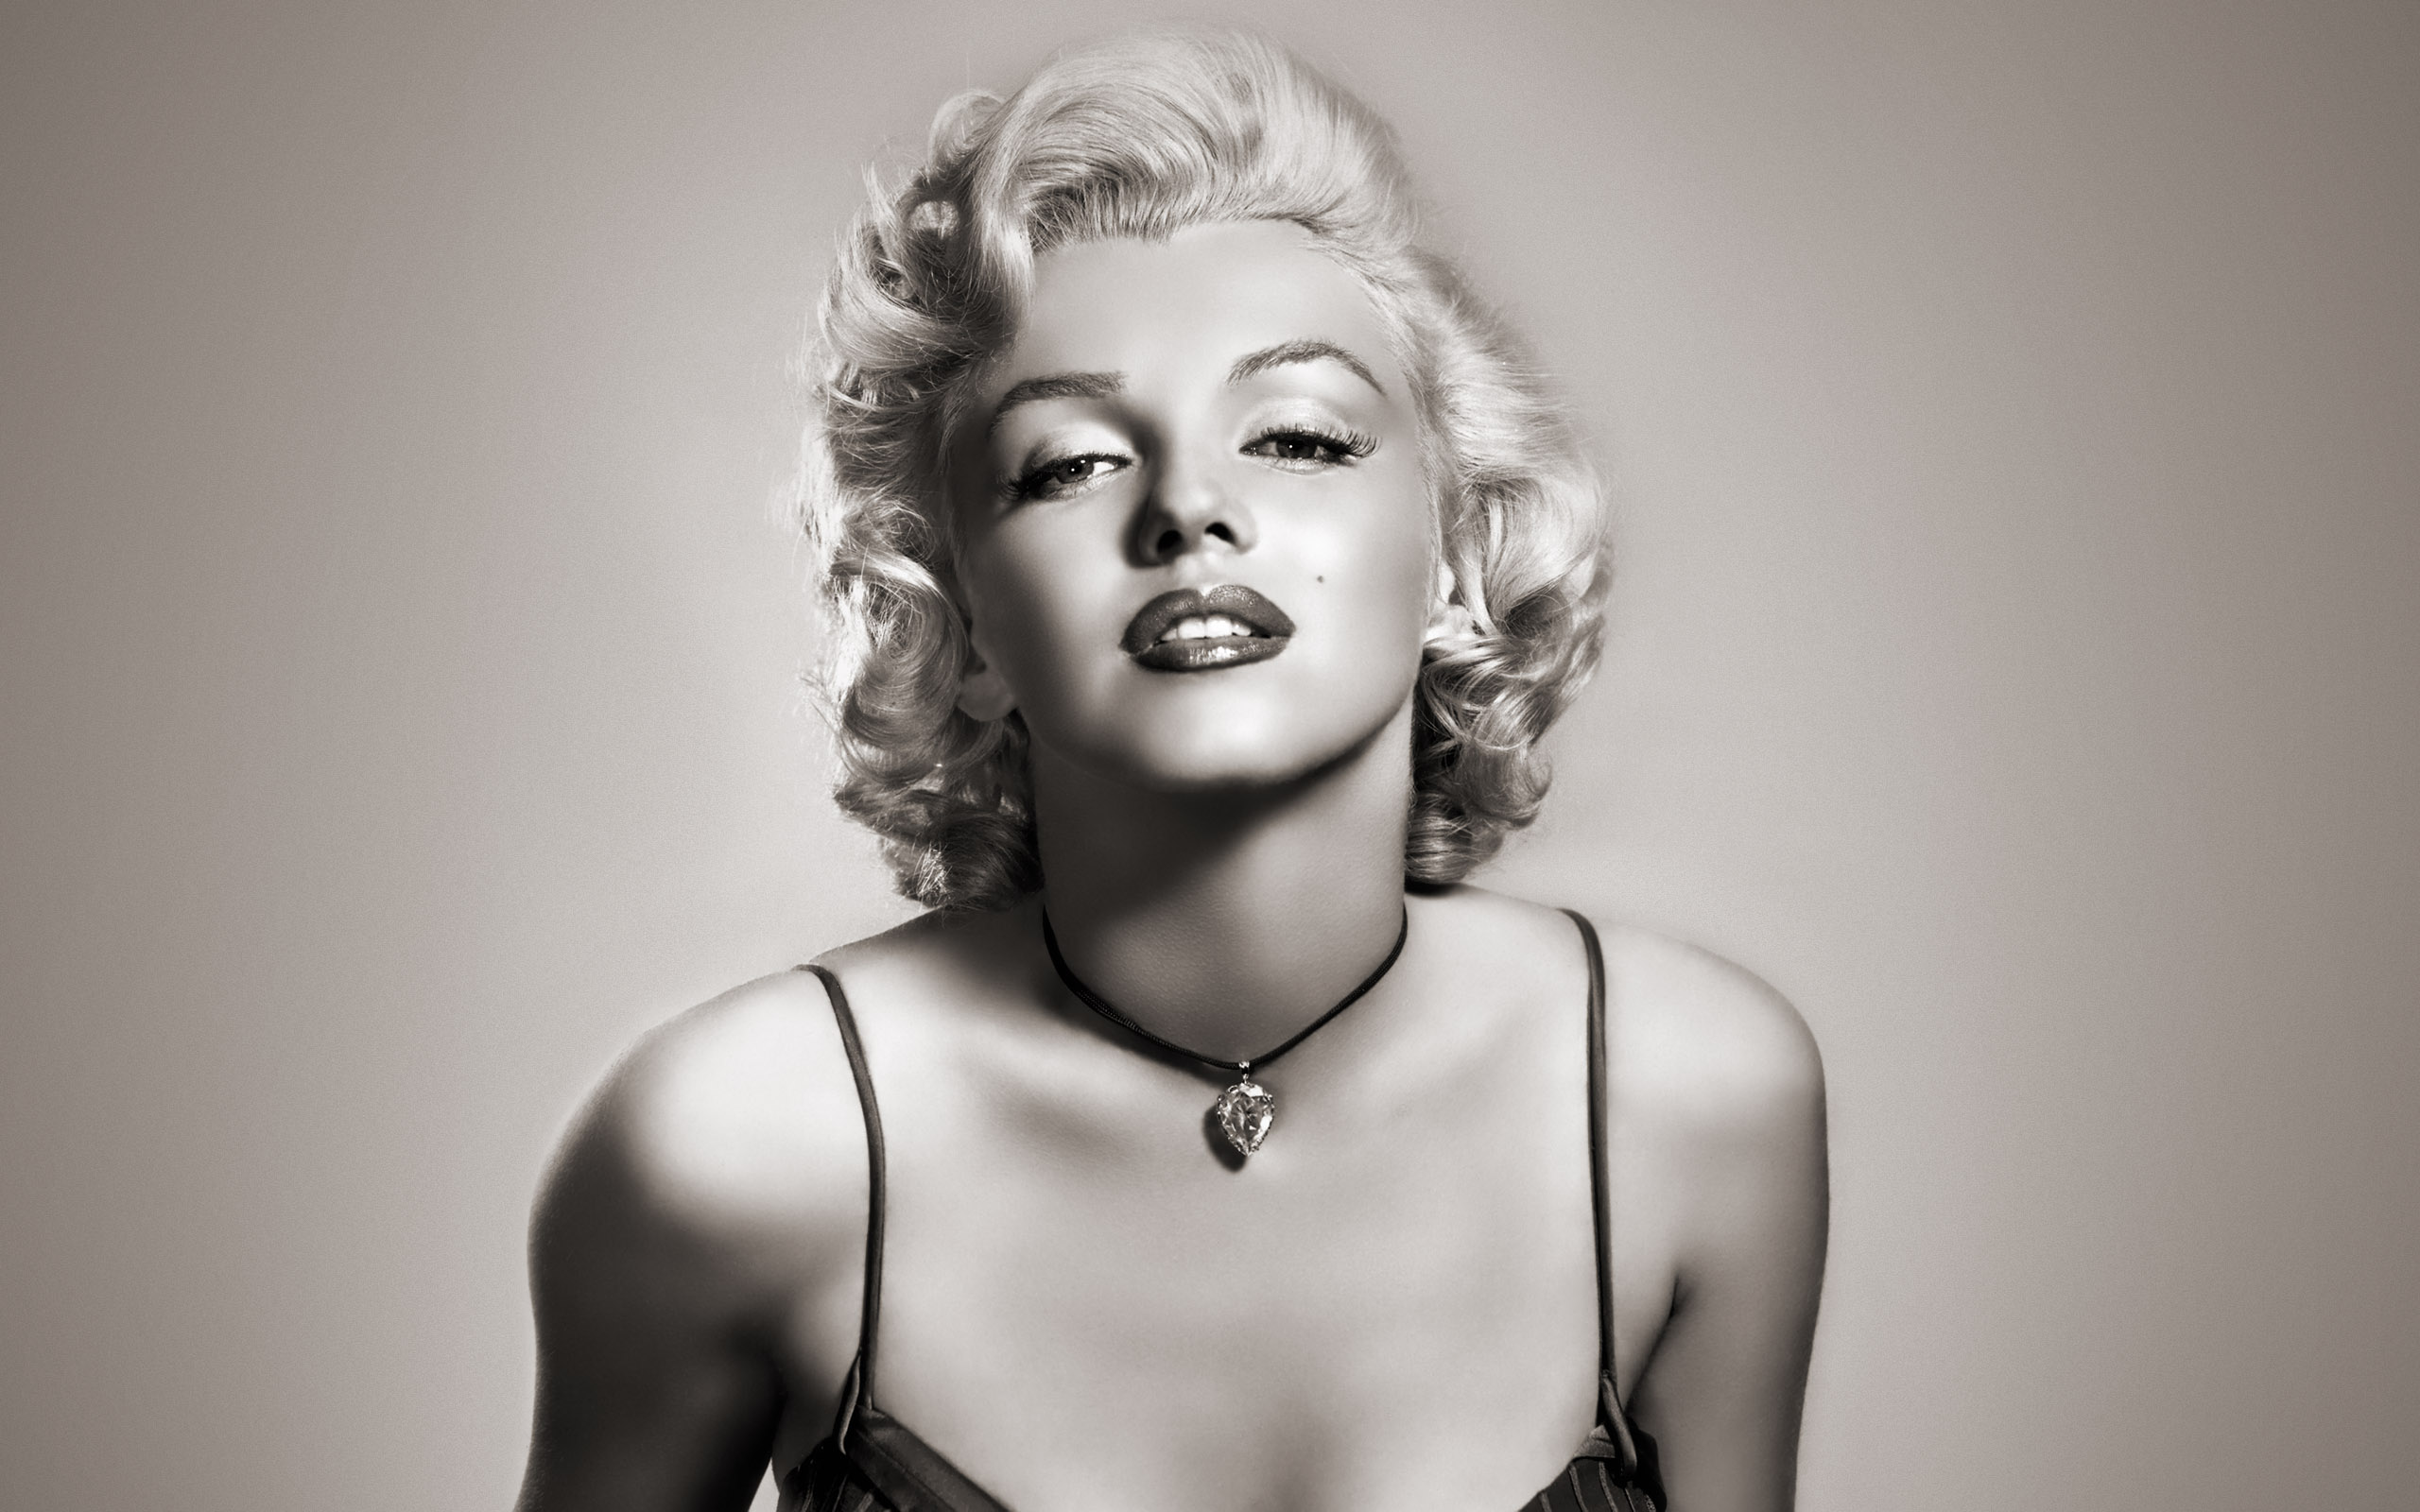 Marilyn Monroe Backgrounds, Compatible - PC, Mobile, Gadgets| 2560x1600 px